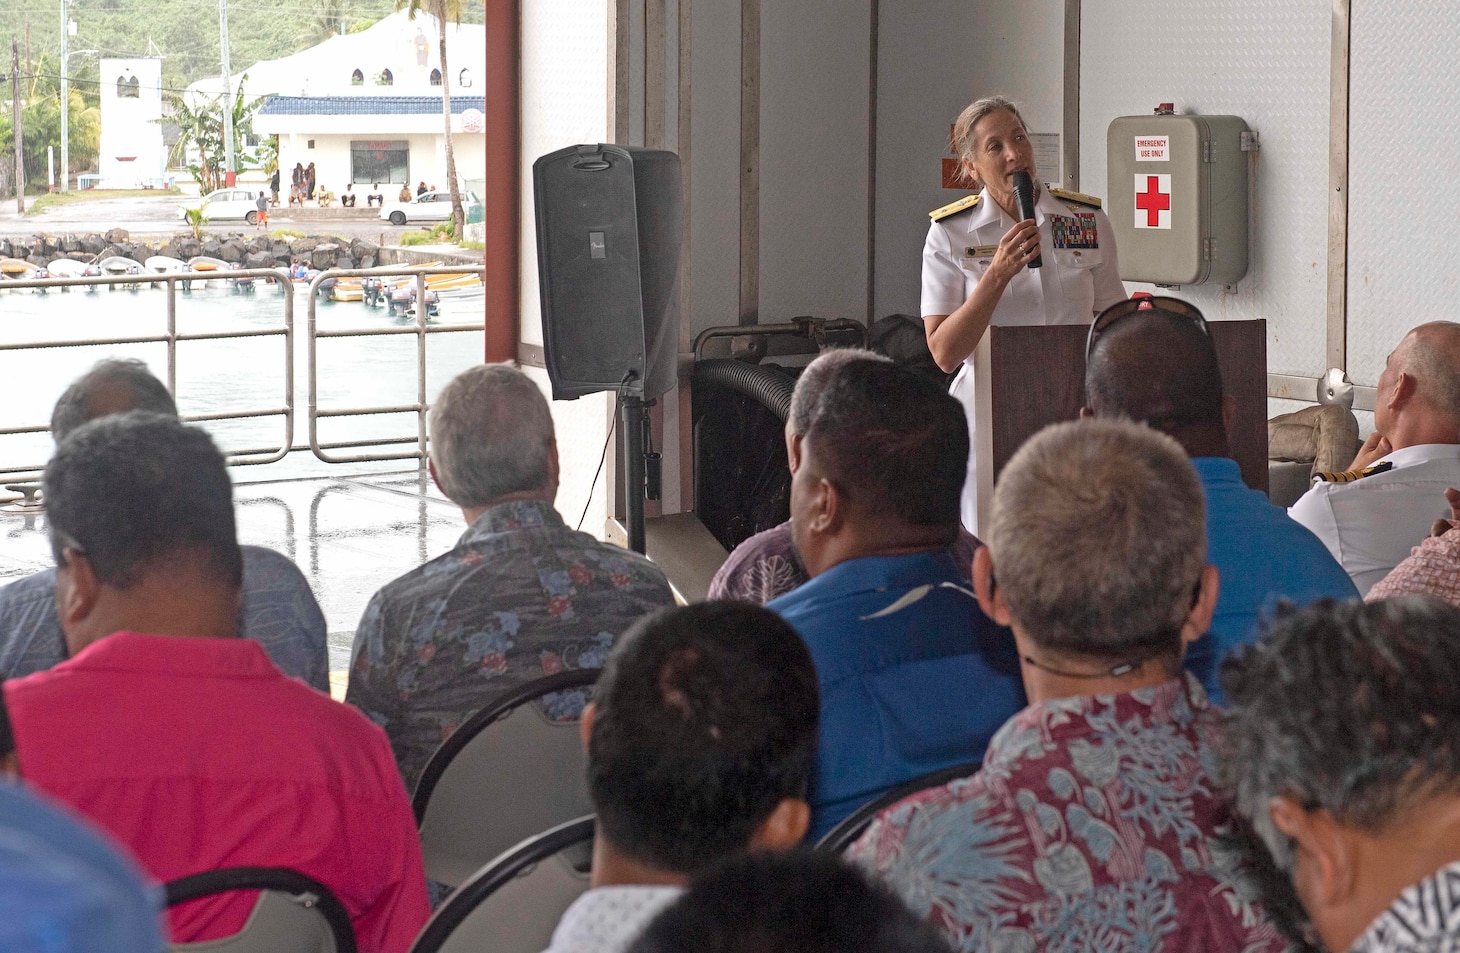 CHUUK, Federated States of Micronesia (April 25, 2019) U.S. Navy Rear Adm. Shoshana Chatfield, Commander, Joint Region Marianas, gives remarks at the closing ceremony aboard the Military Sealift Command expeditionary fast transport ship USNS Brunswick (T-EPF 6), strengthening strategic partnerships during Pacific Partnership 2019. Pacific Partnership, now in its 14th iteration, is the largest annual multinational humanitarian assistance and disaster relief preparedness mission conducted in the Indo-Pacific.